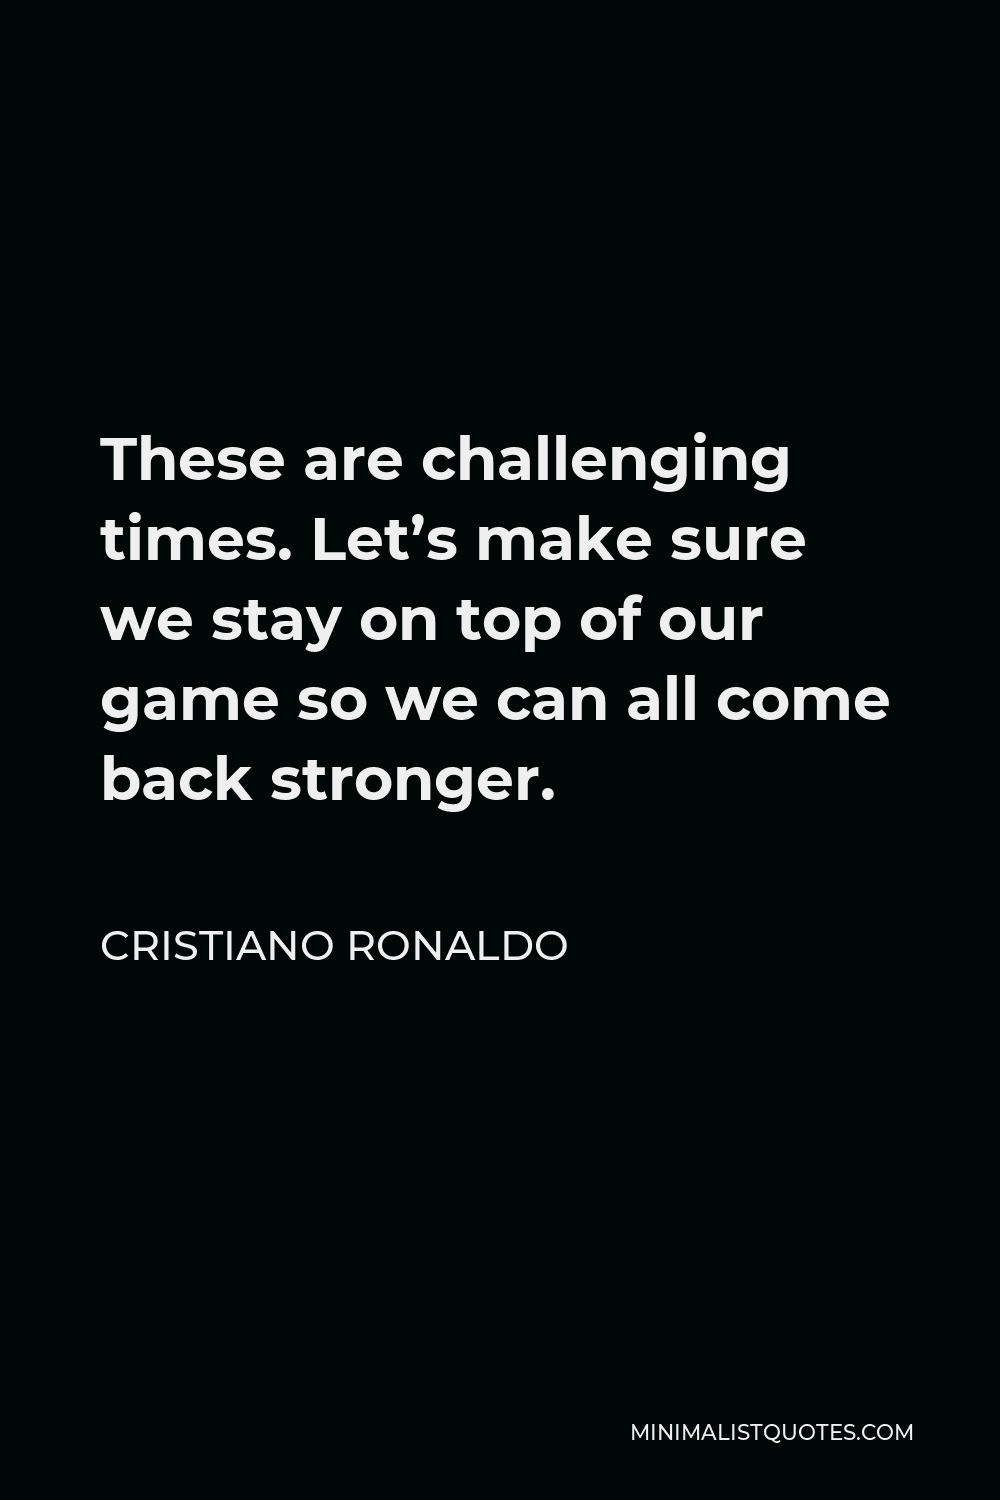 Cristiano Ronaldo Quote - These are challenging times. Let’s make sure we stay on top of our game so we can all come back stronger.